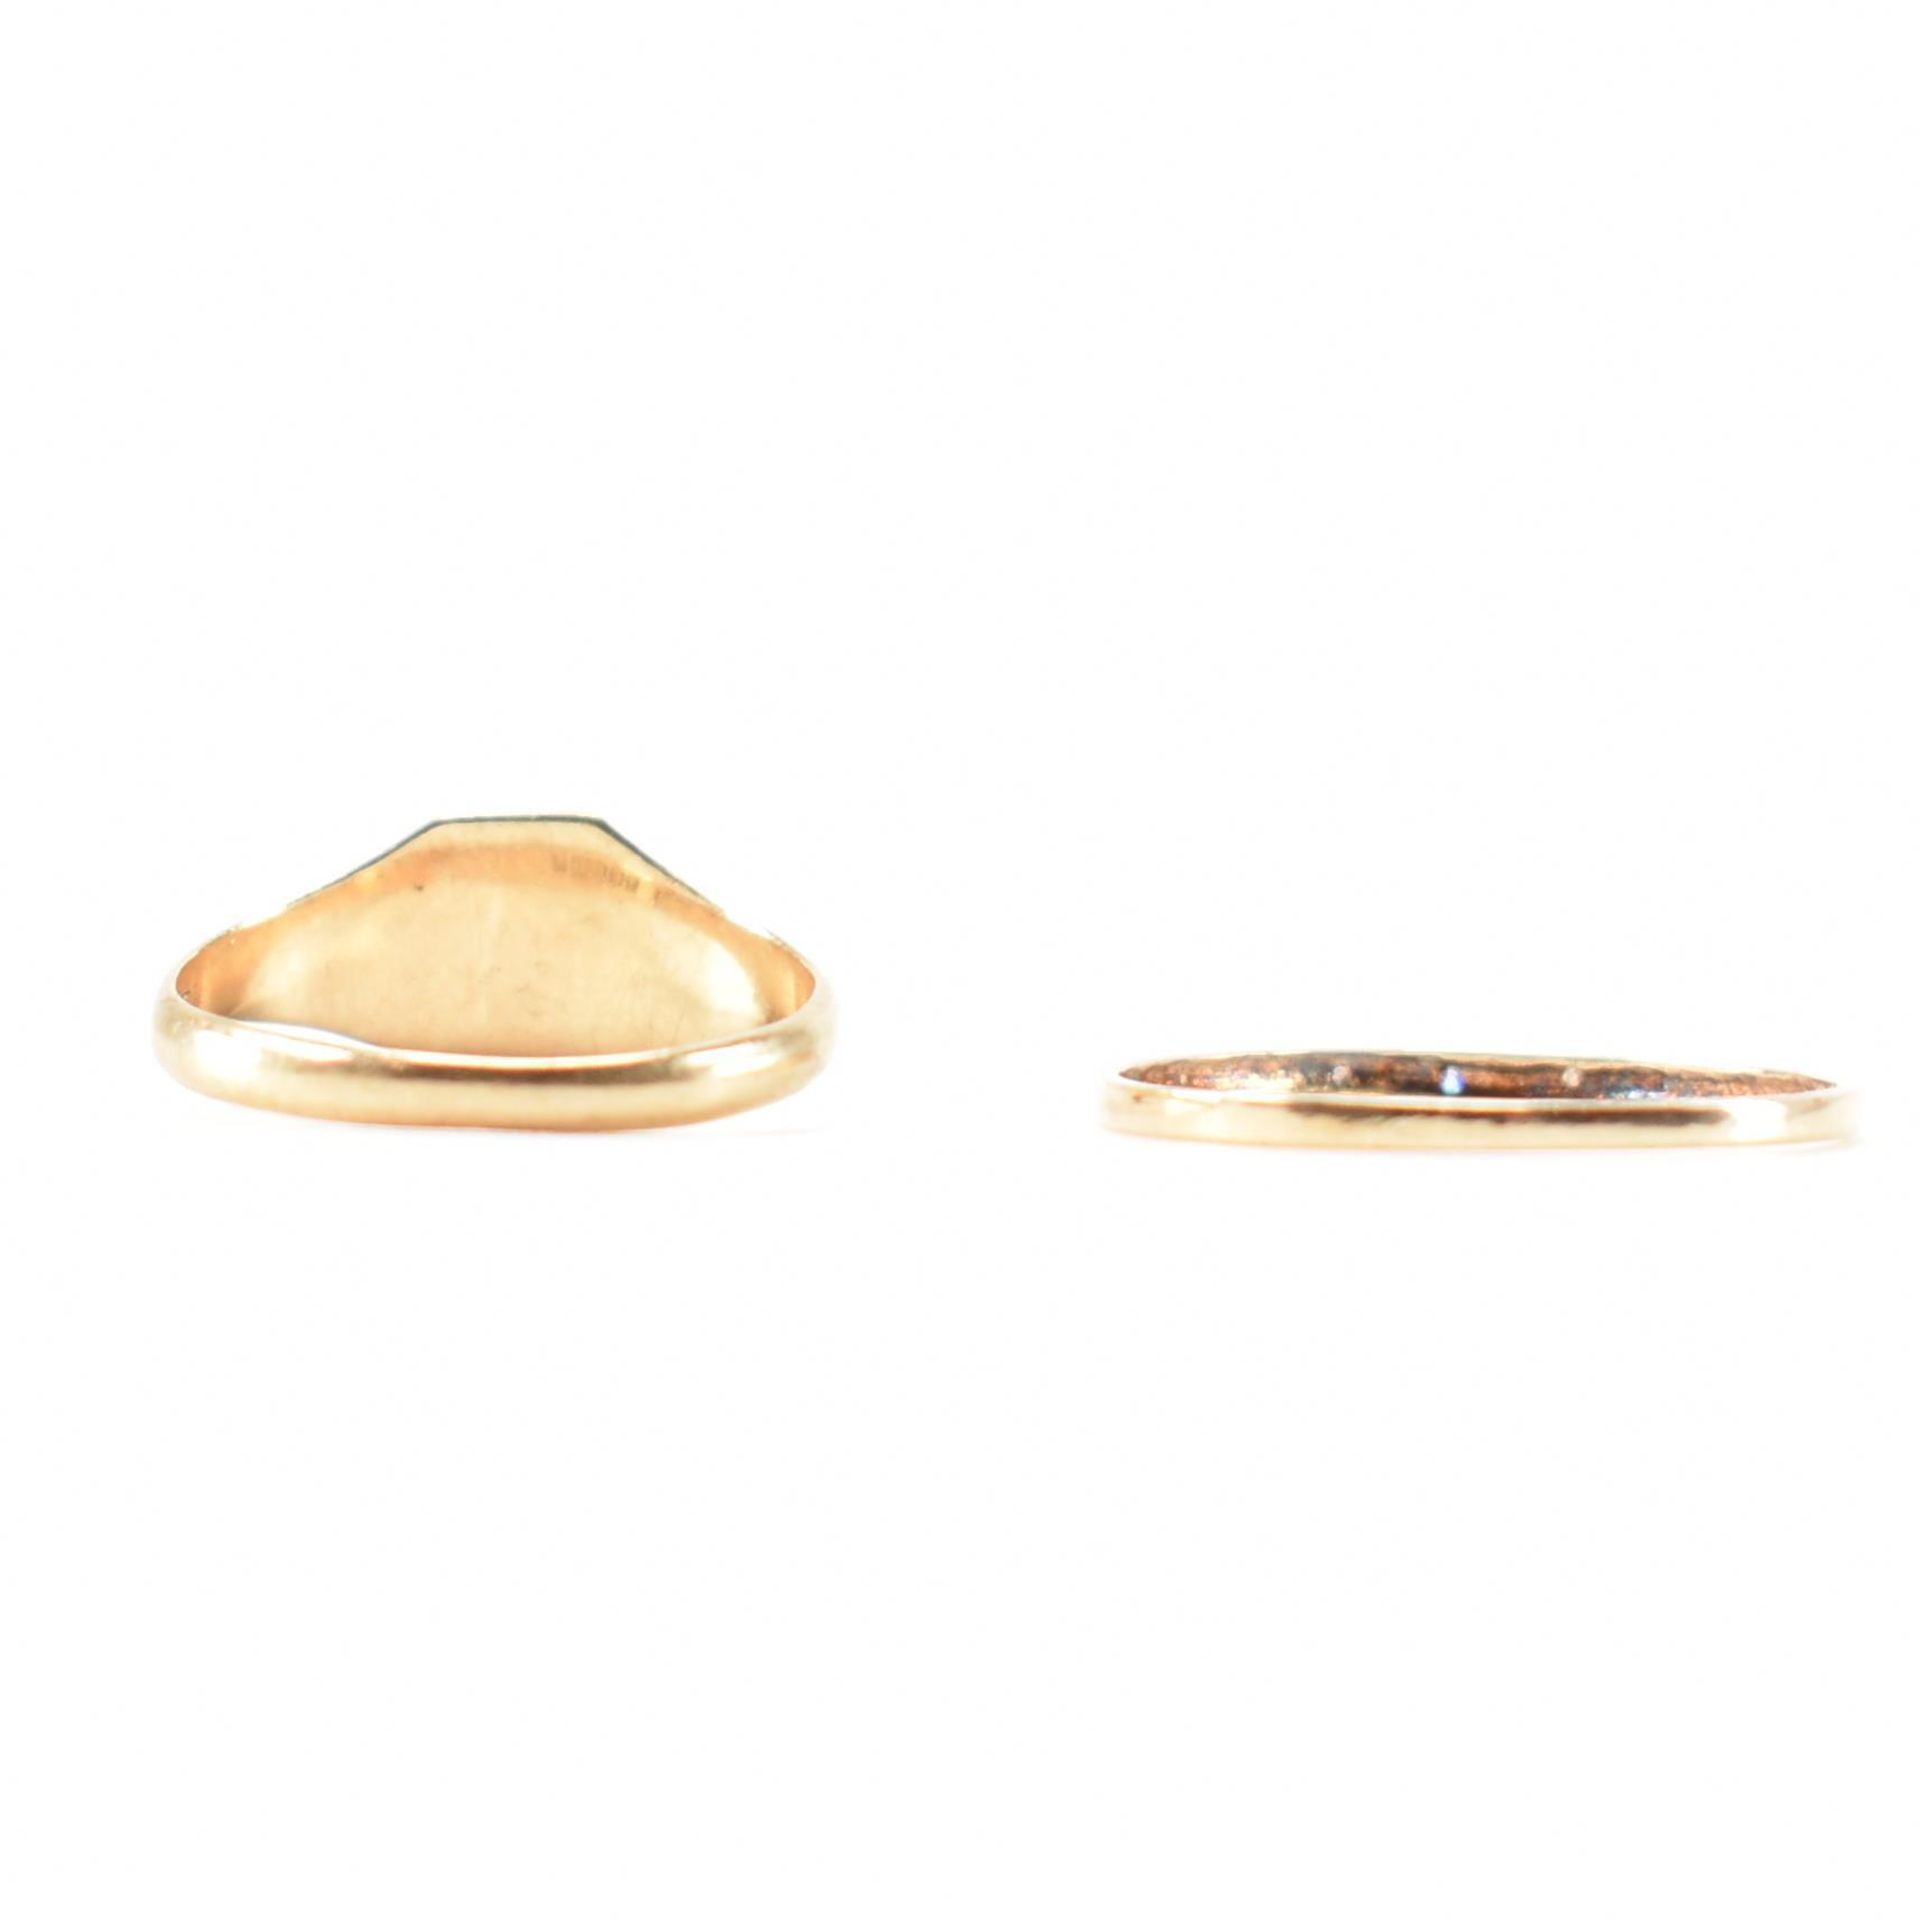 HALLMARKED 9CT GOLD SIGNET RING & GOLD BAND RING - Image 3 of 7